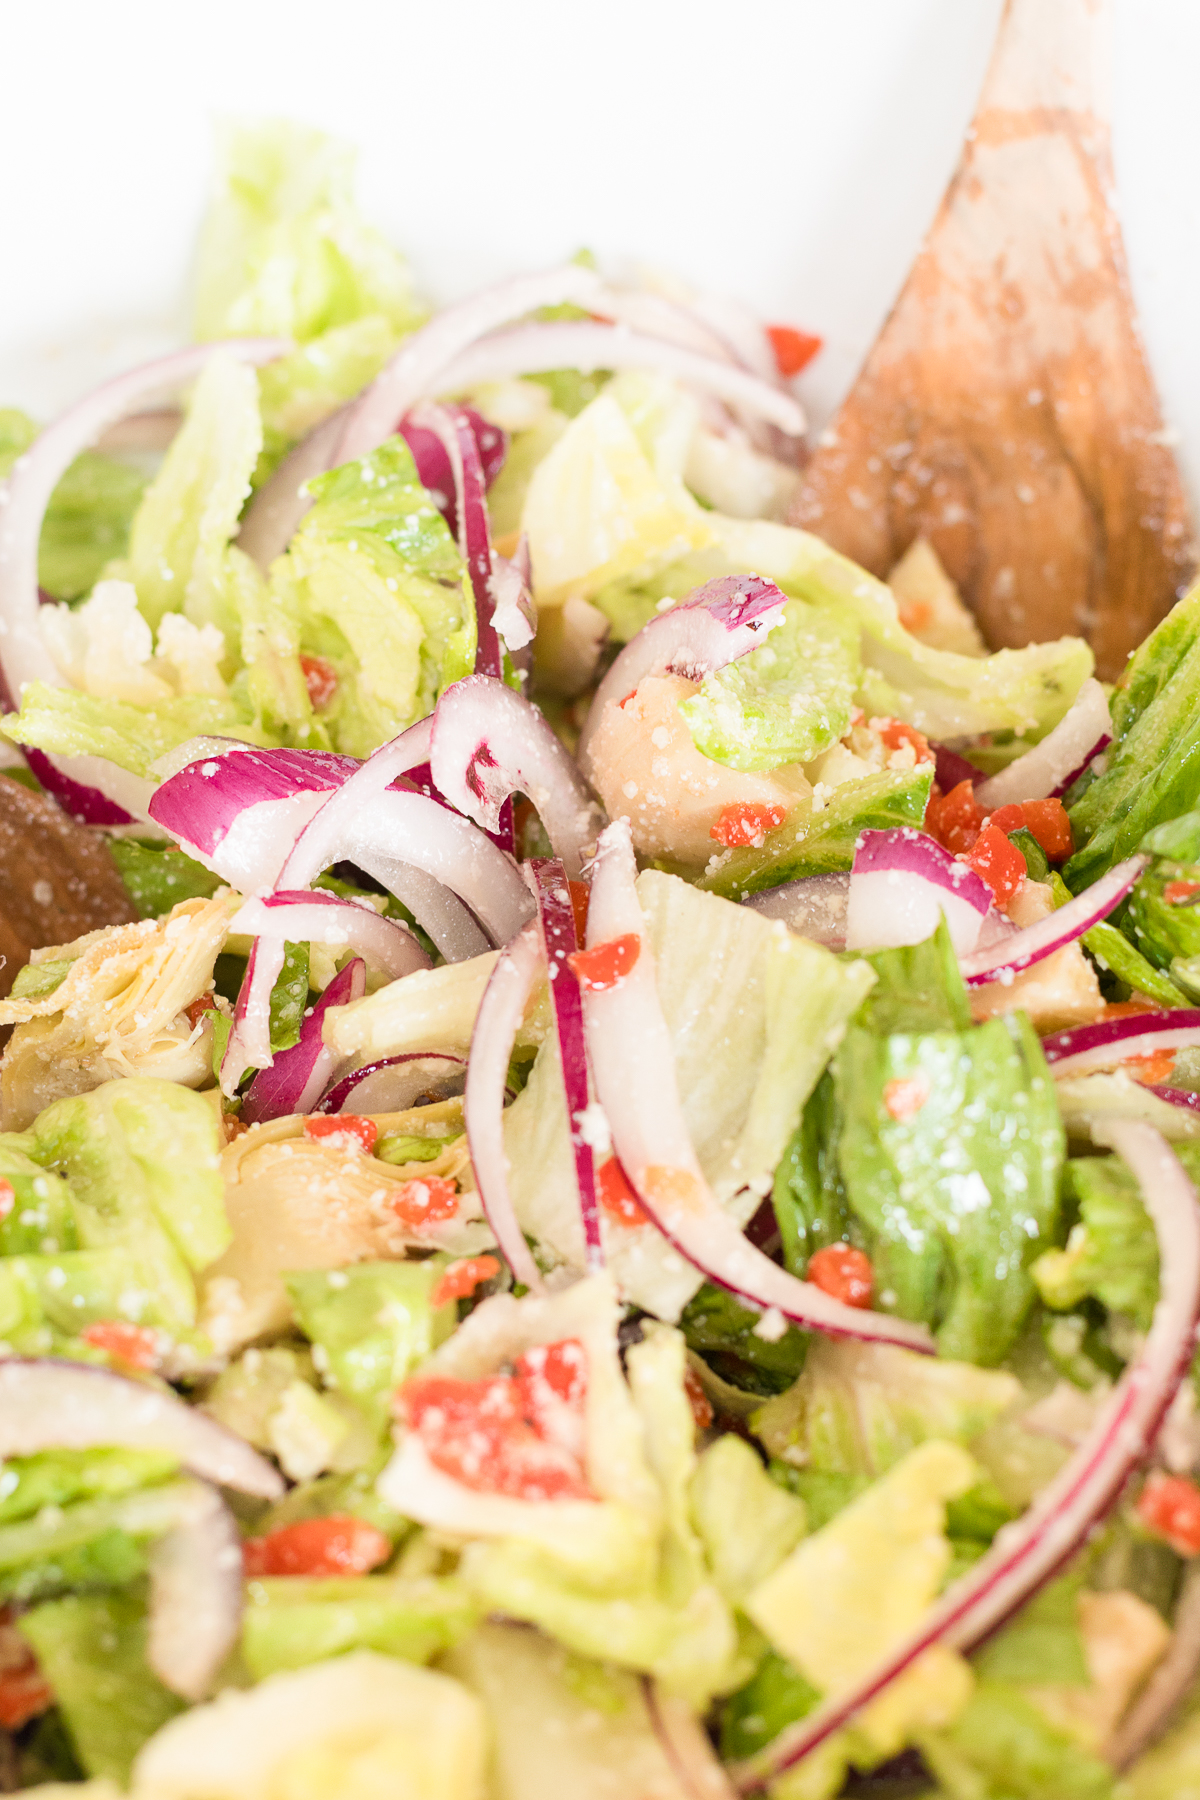 A fresh Italian salad mixed with lettuce, red onions, and tomatoes, partially tossed with wooden utensils.